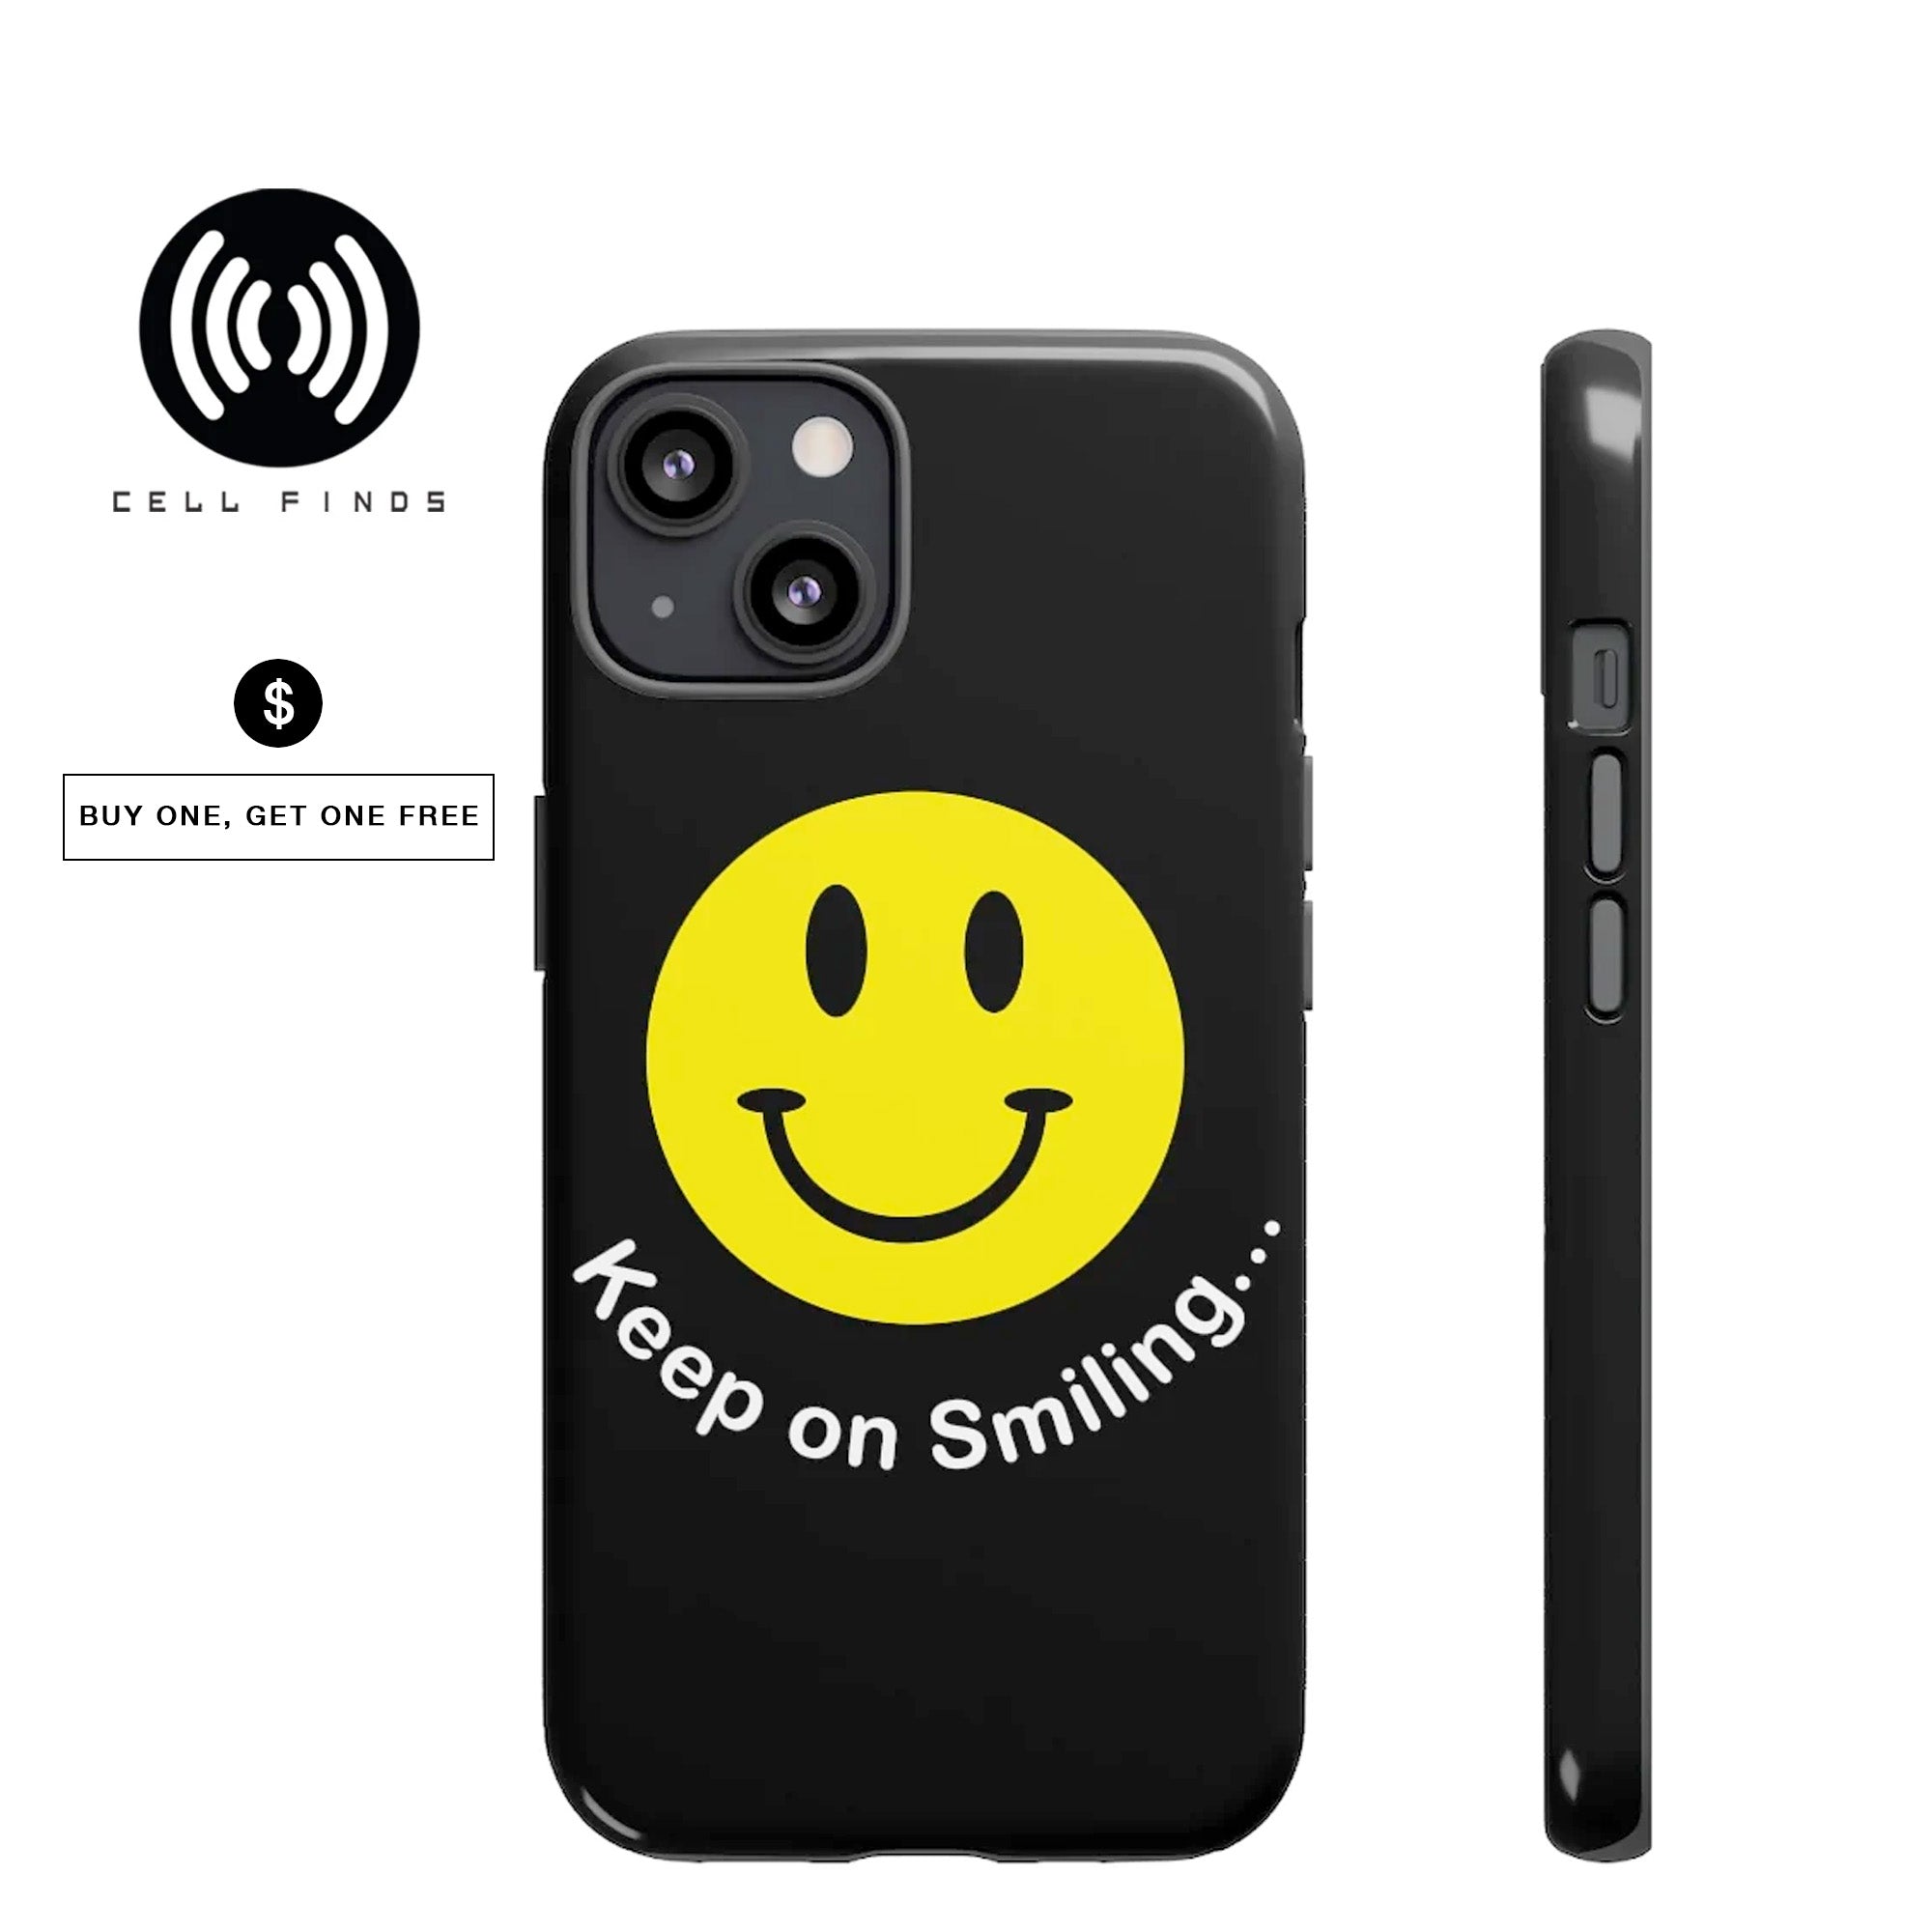 Cute Keep on Smiling iPhone Case